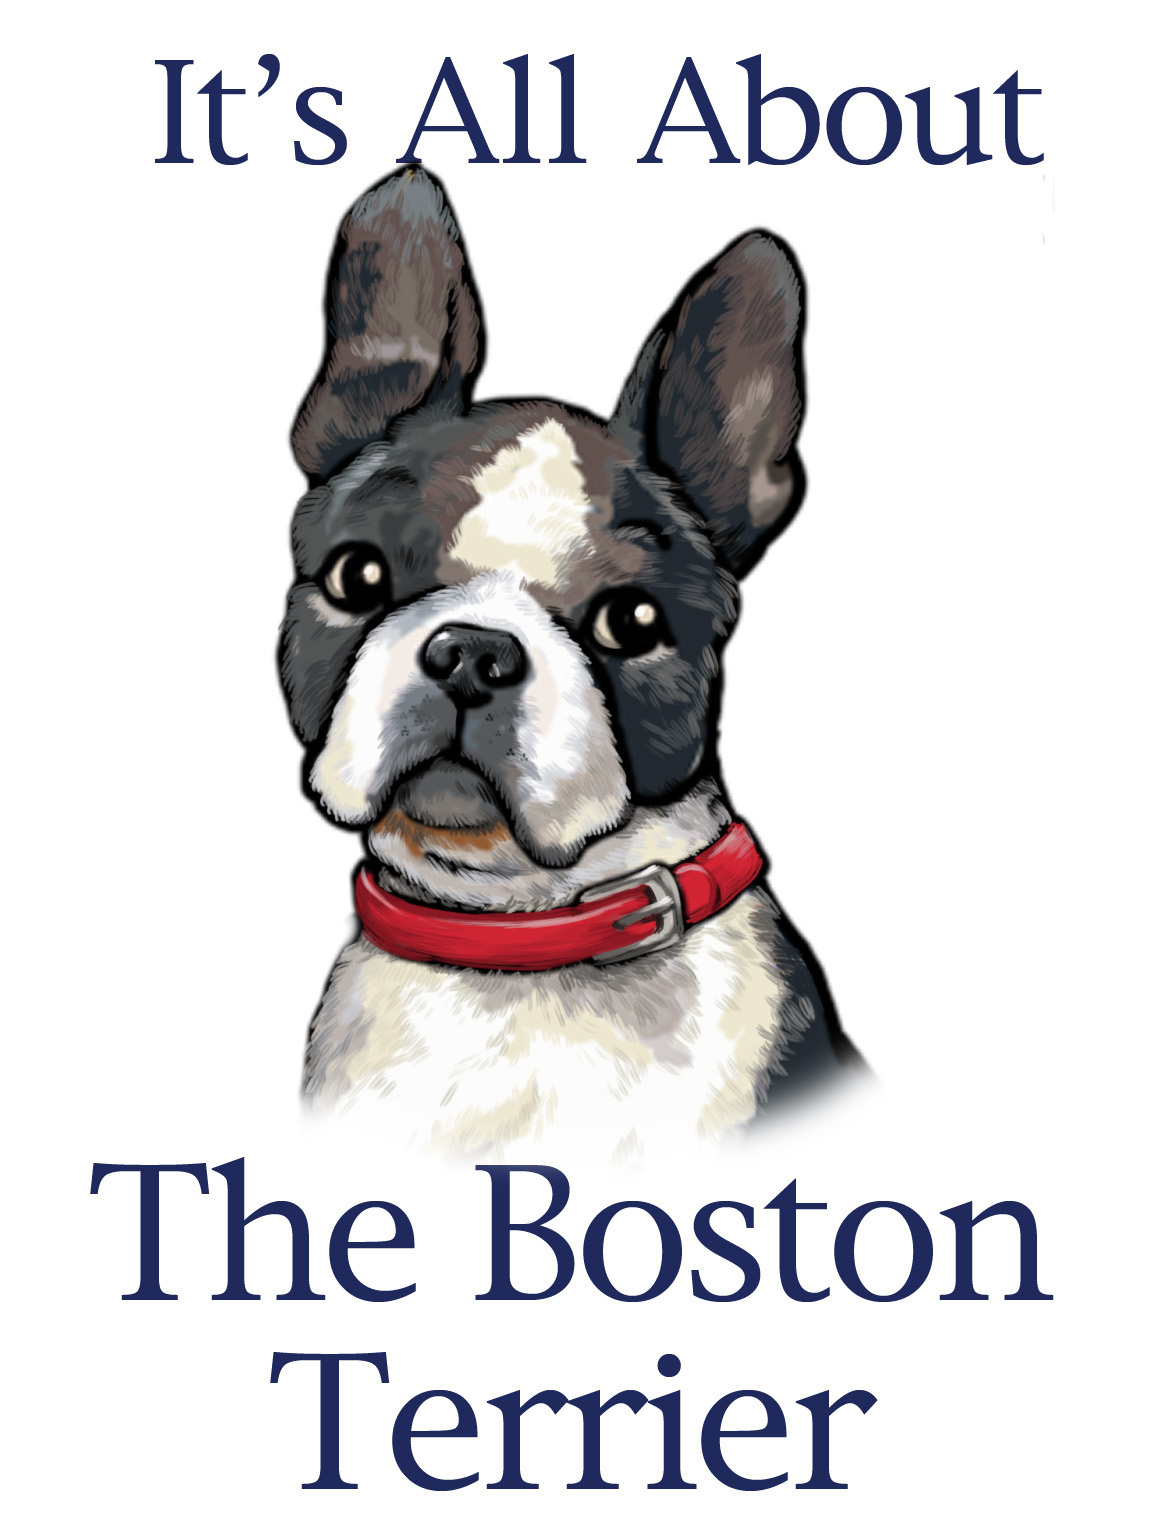 Boston Terriers Image Bostons HD Wallpaper And Background